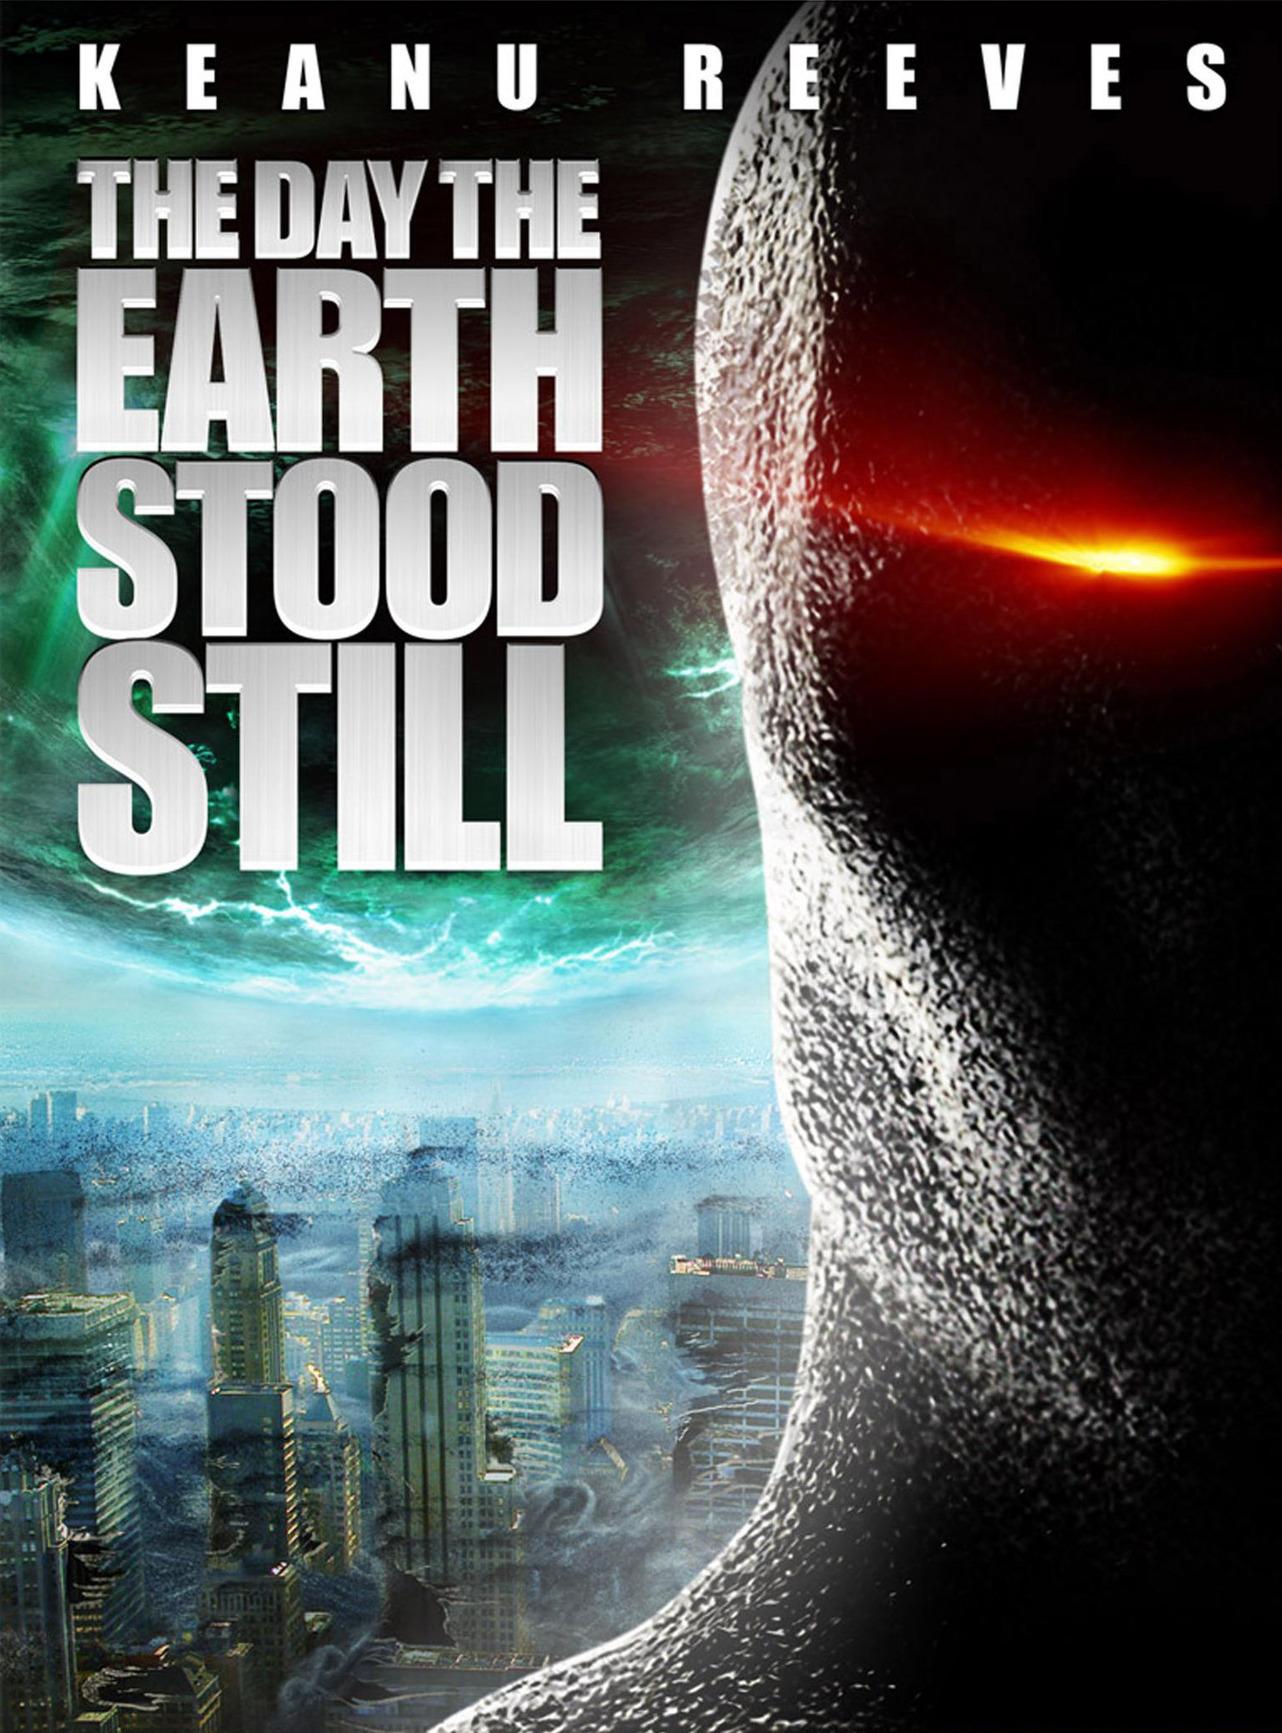 The Day The Earth Stood Still.